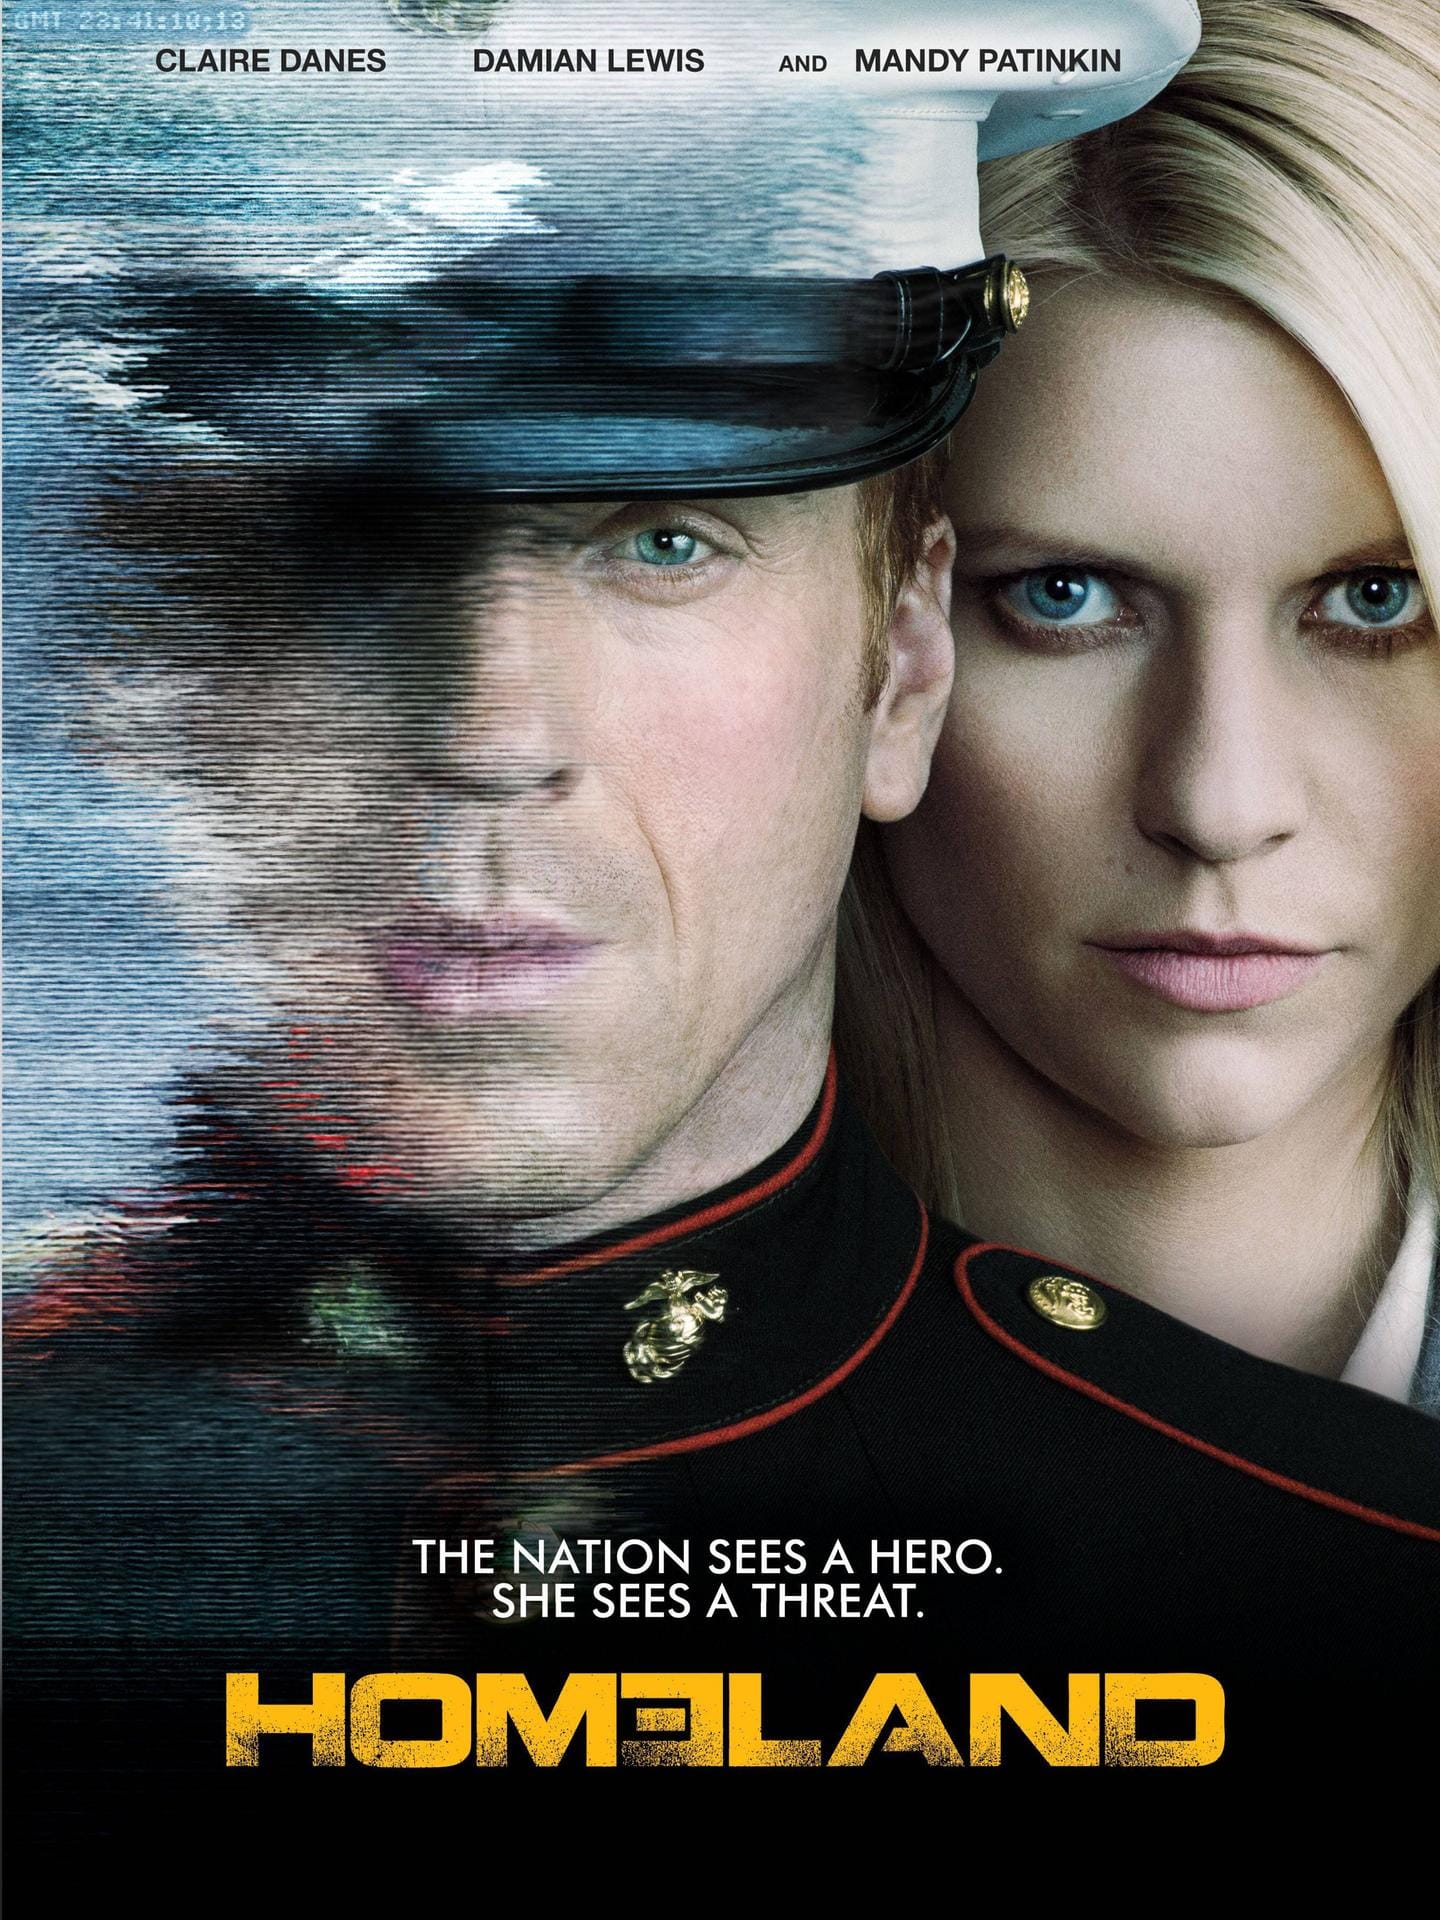 July 20 2012 Emmy 2012 Nominee for Outstanding Drama Series Homeland season 2 2012 PICTURE